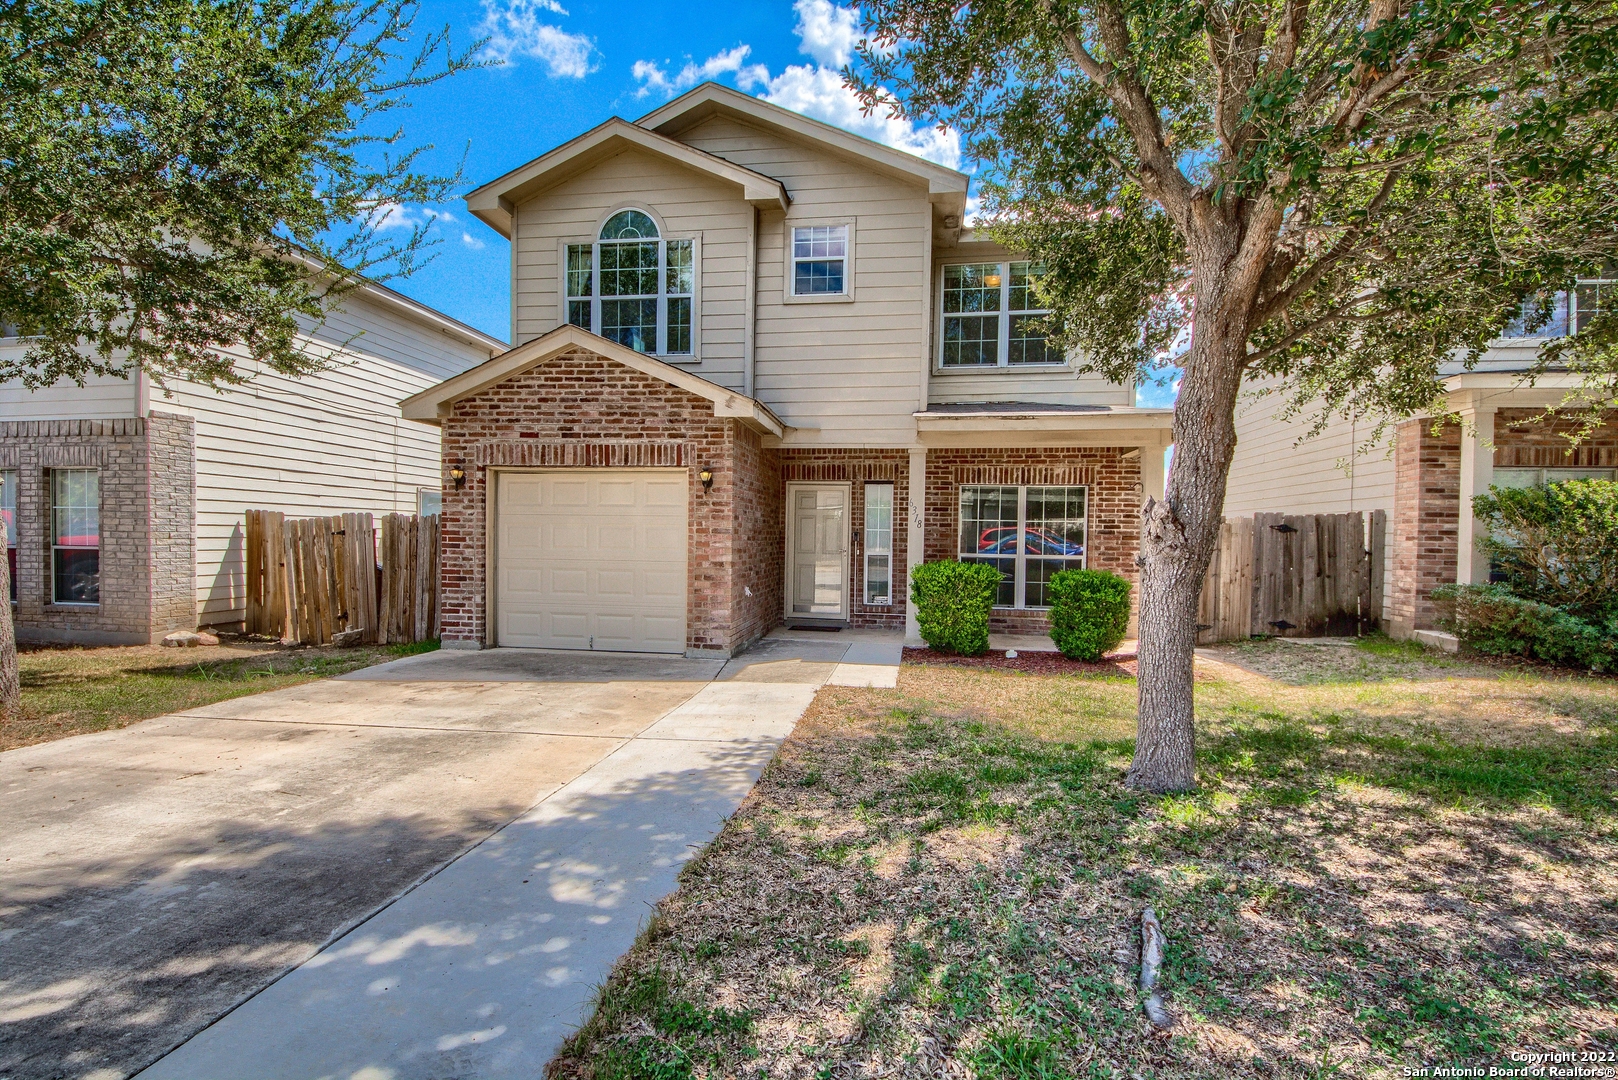 Move-In Ready, Cozy Home with Open Floor Plan. The one car garage offers you and your car respite from the summer heat. Spend your evenings cooking out while relaxing under your covered patio or take a short walk to the neighborhood park. Enjoy the convenience of what Heathers Cove Subdivision has to offer.